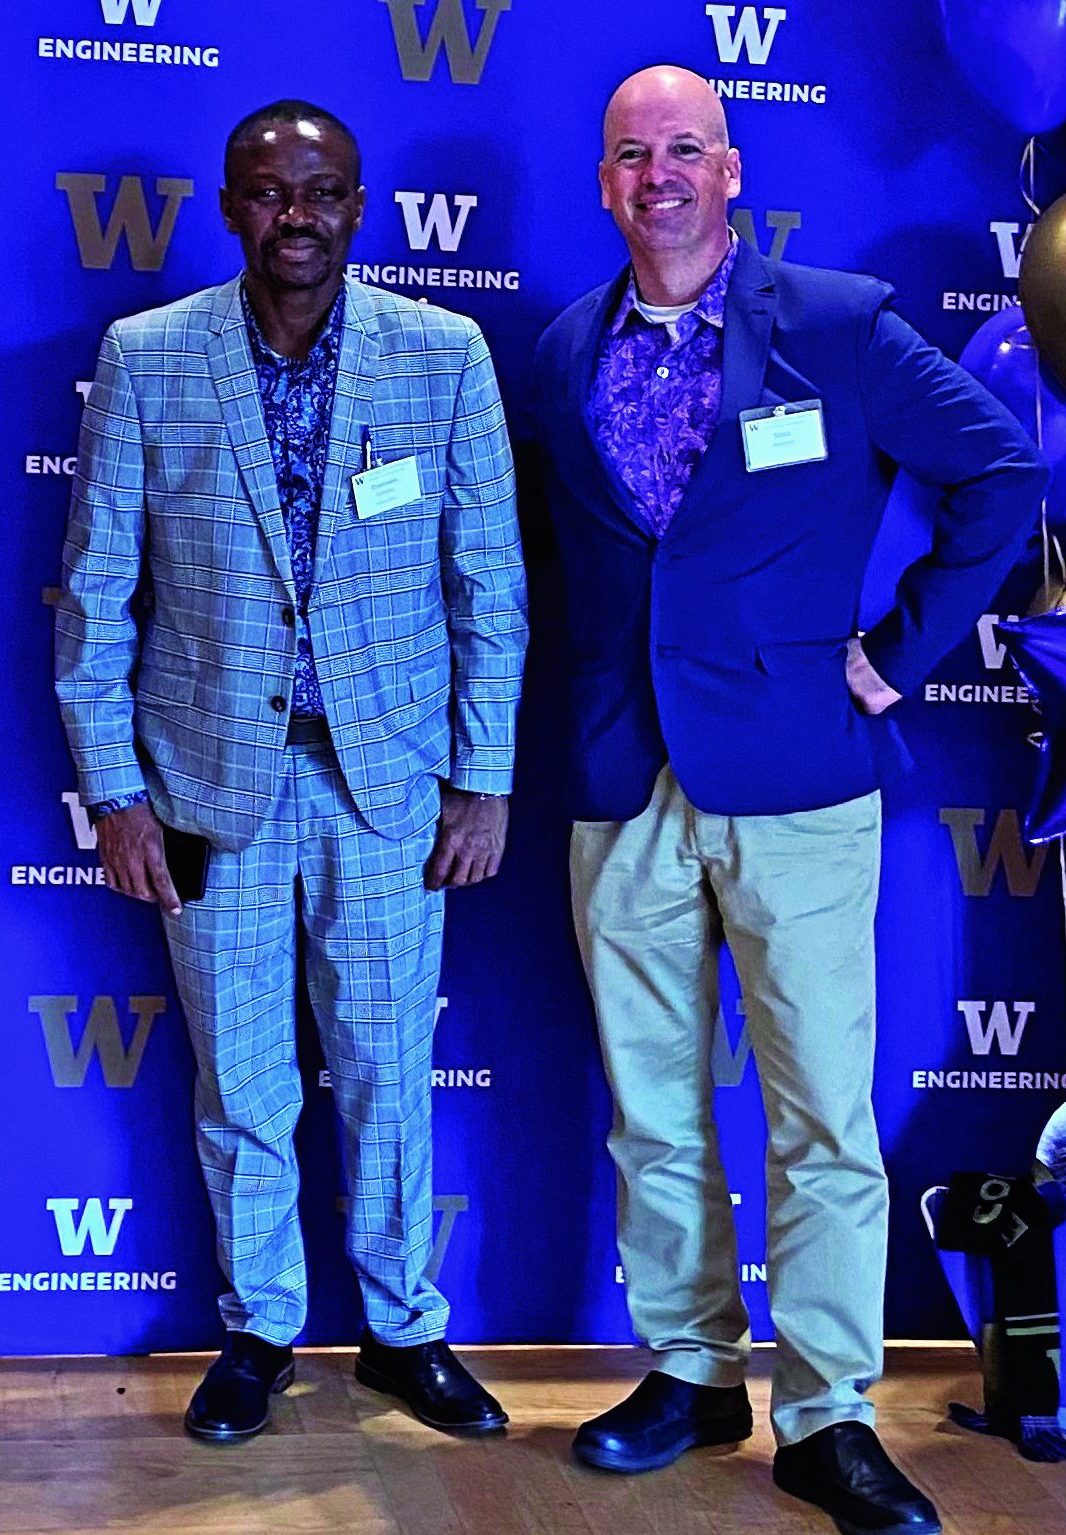 A Matson Leadership Diversity Scholar stands with a Matson Ambassador in front of a Univeristy of Washington Engineering step and repeat.